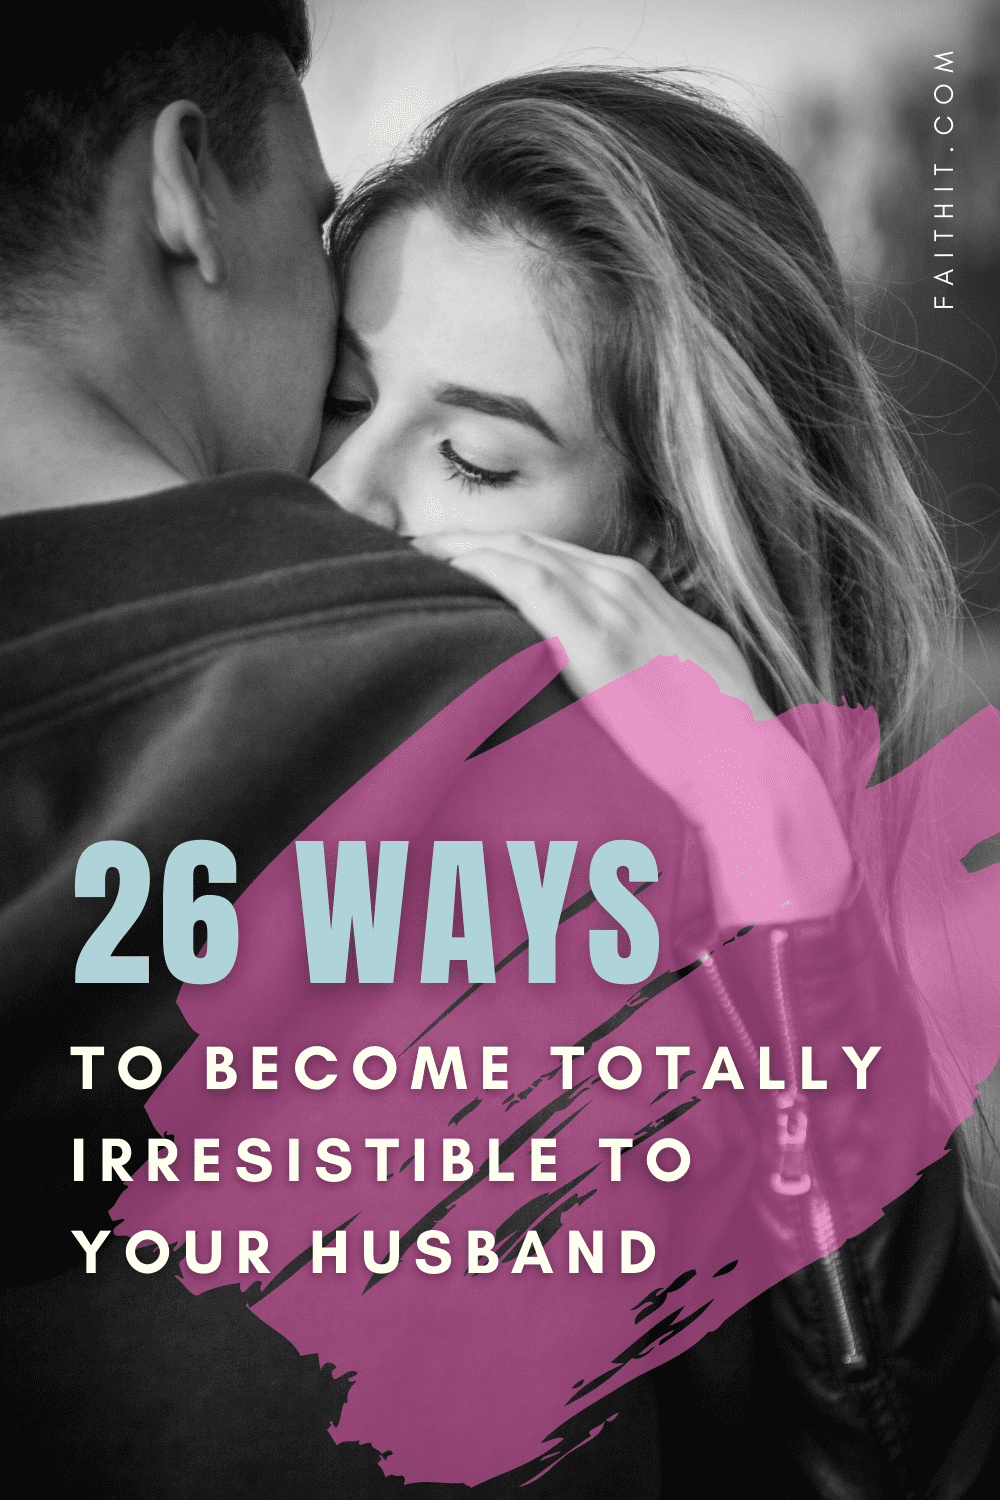 26 Ways to Become Totally Irresistible to Your Husband